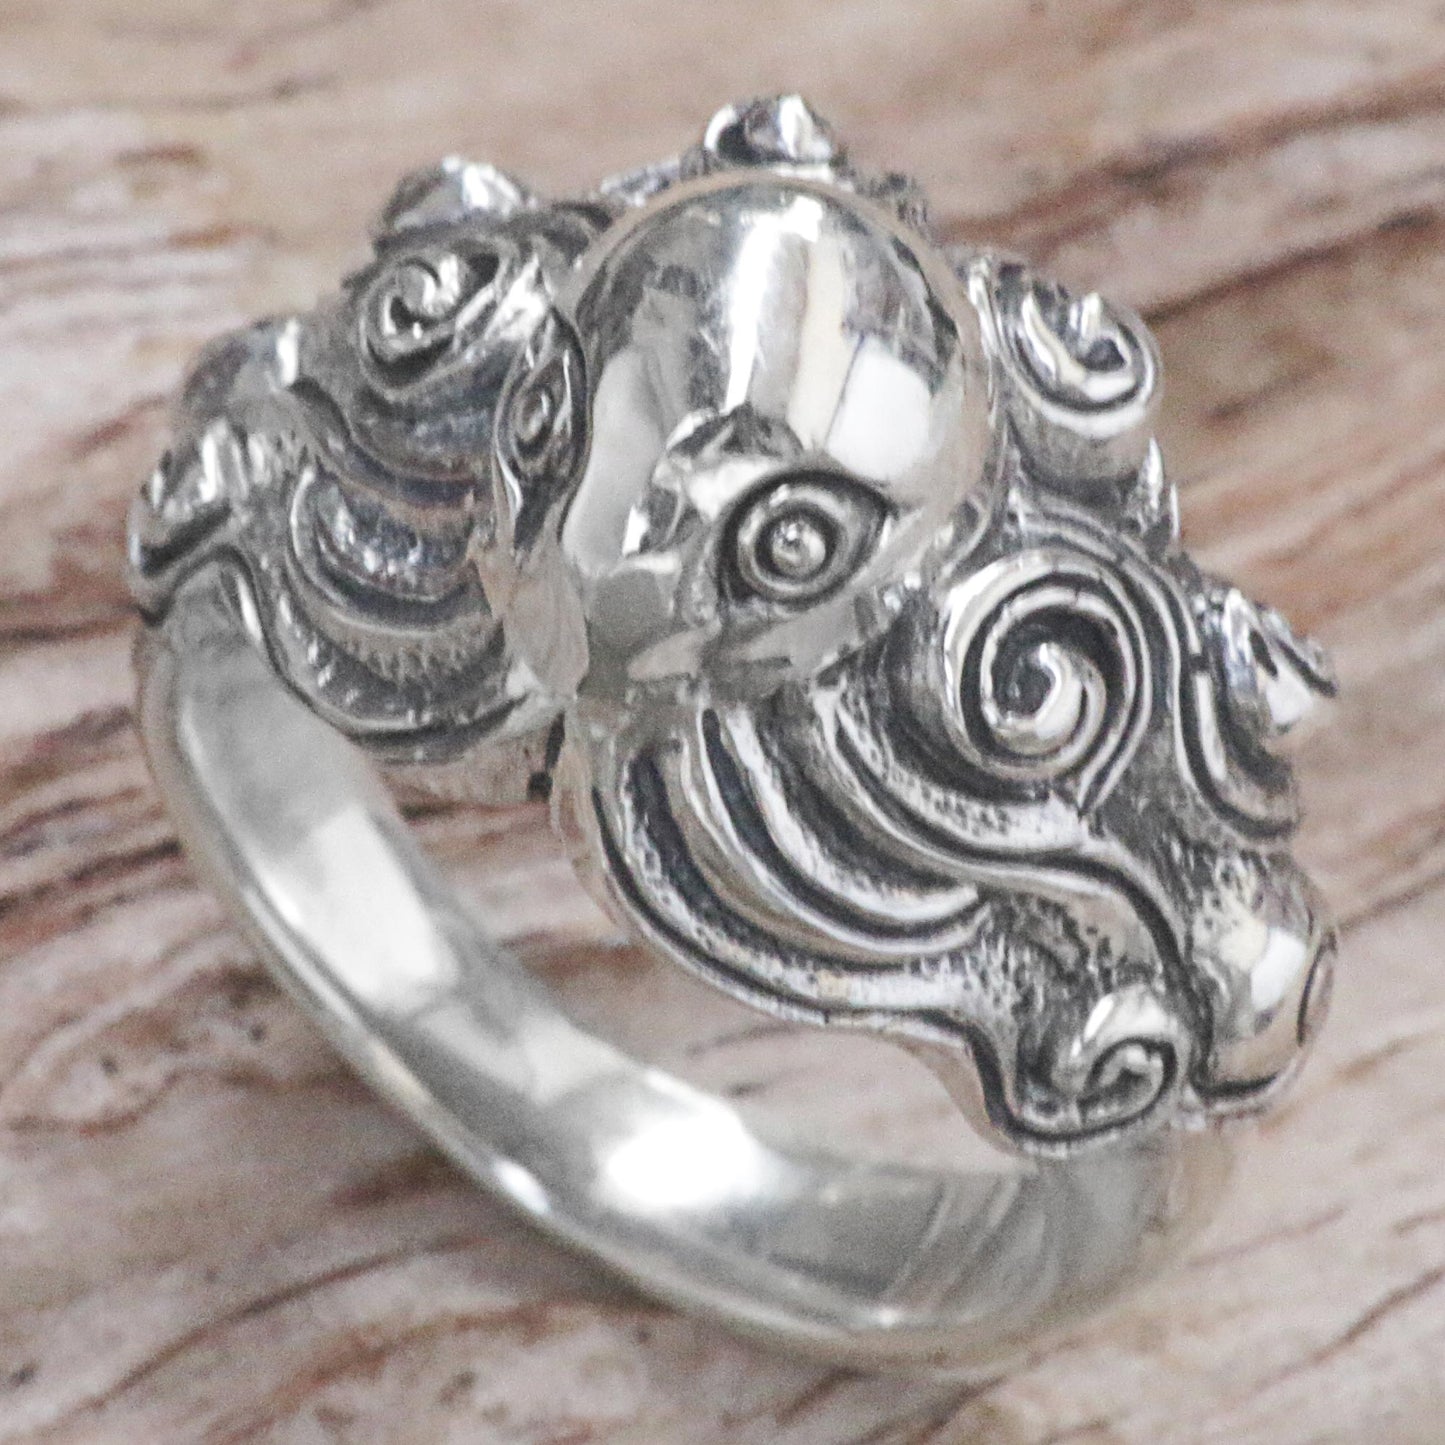 Octopus of the Deep Sterling Silver Ring